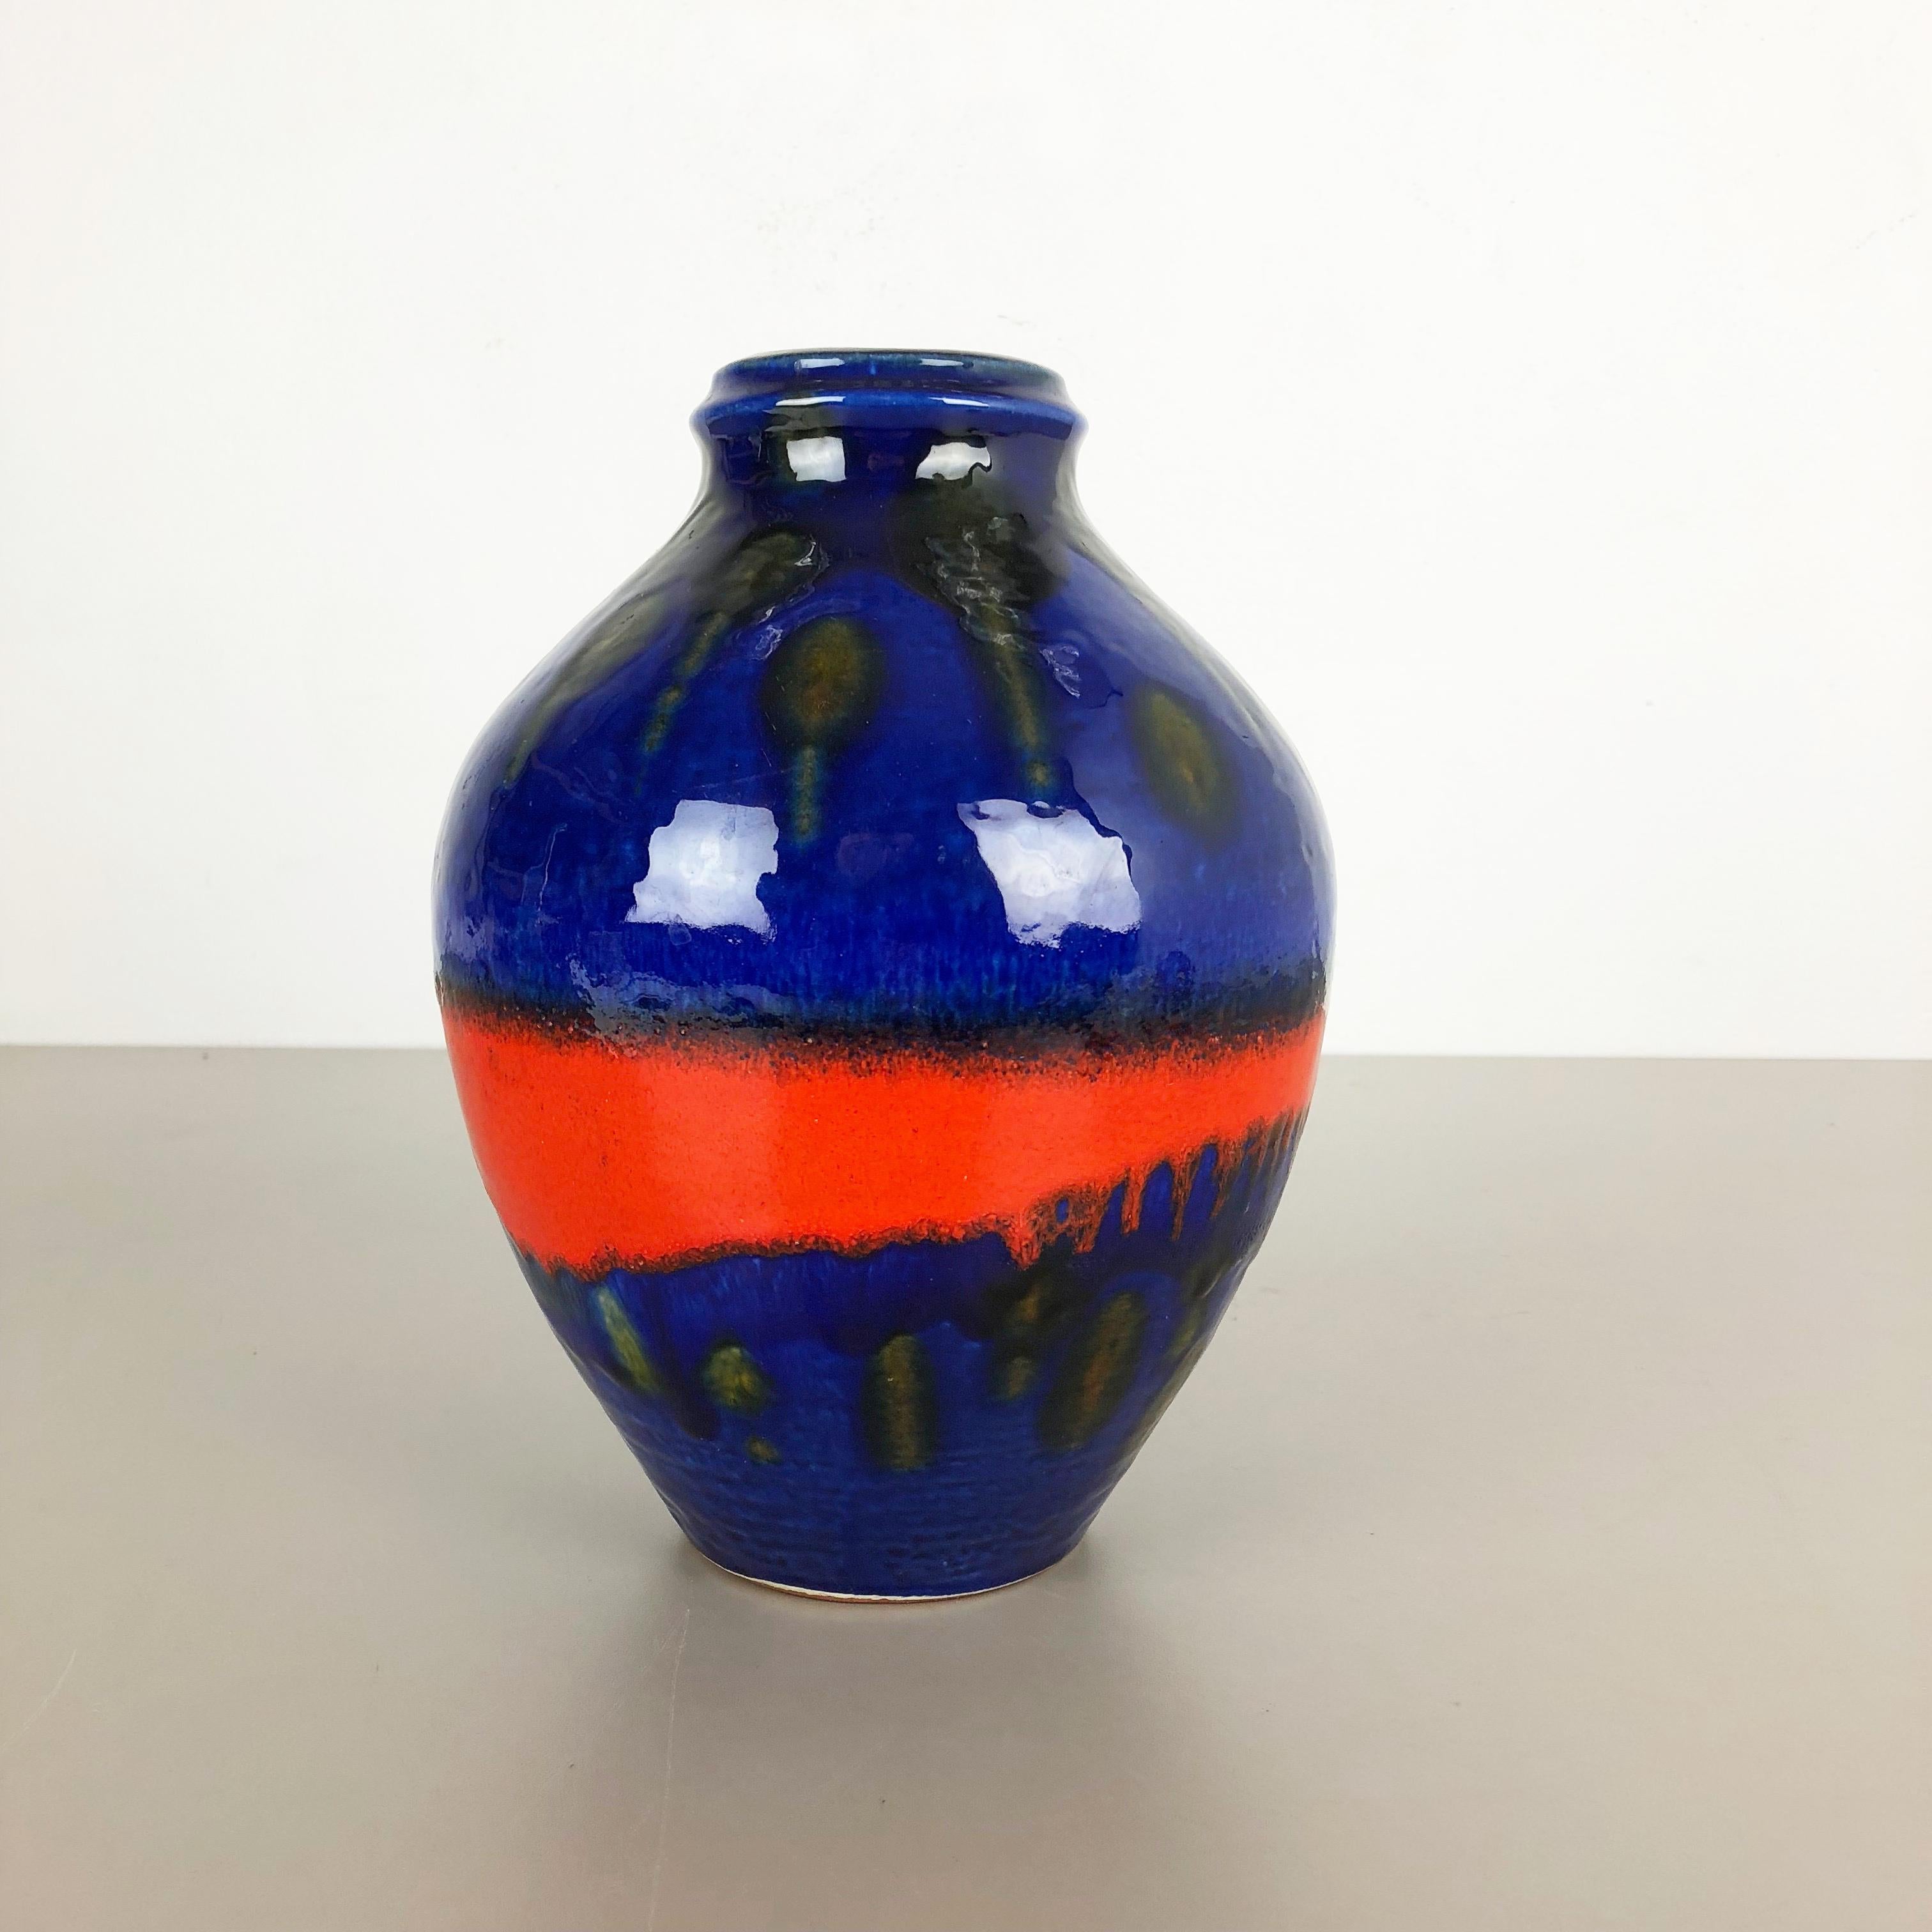 Article:

Ceramic pottery vase


Origin:

Germany


Designer:

Heinz Siery


Producer:

Carstens Tönnieshof, Germany


Decade:

1970s


This original vintage Pottery Object was designed by Heinz Siery and produced by Cartens